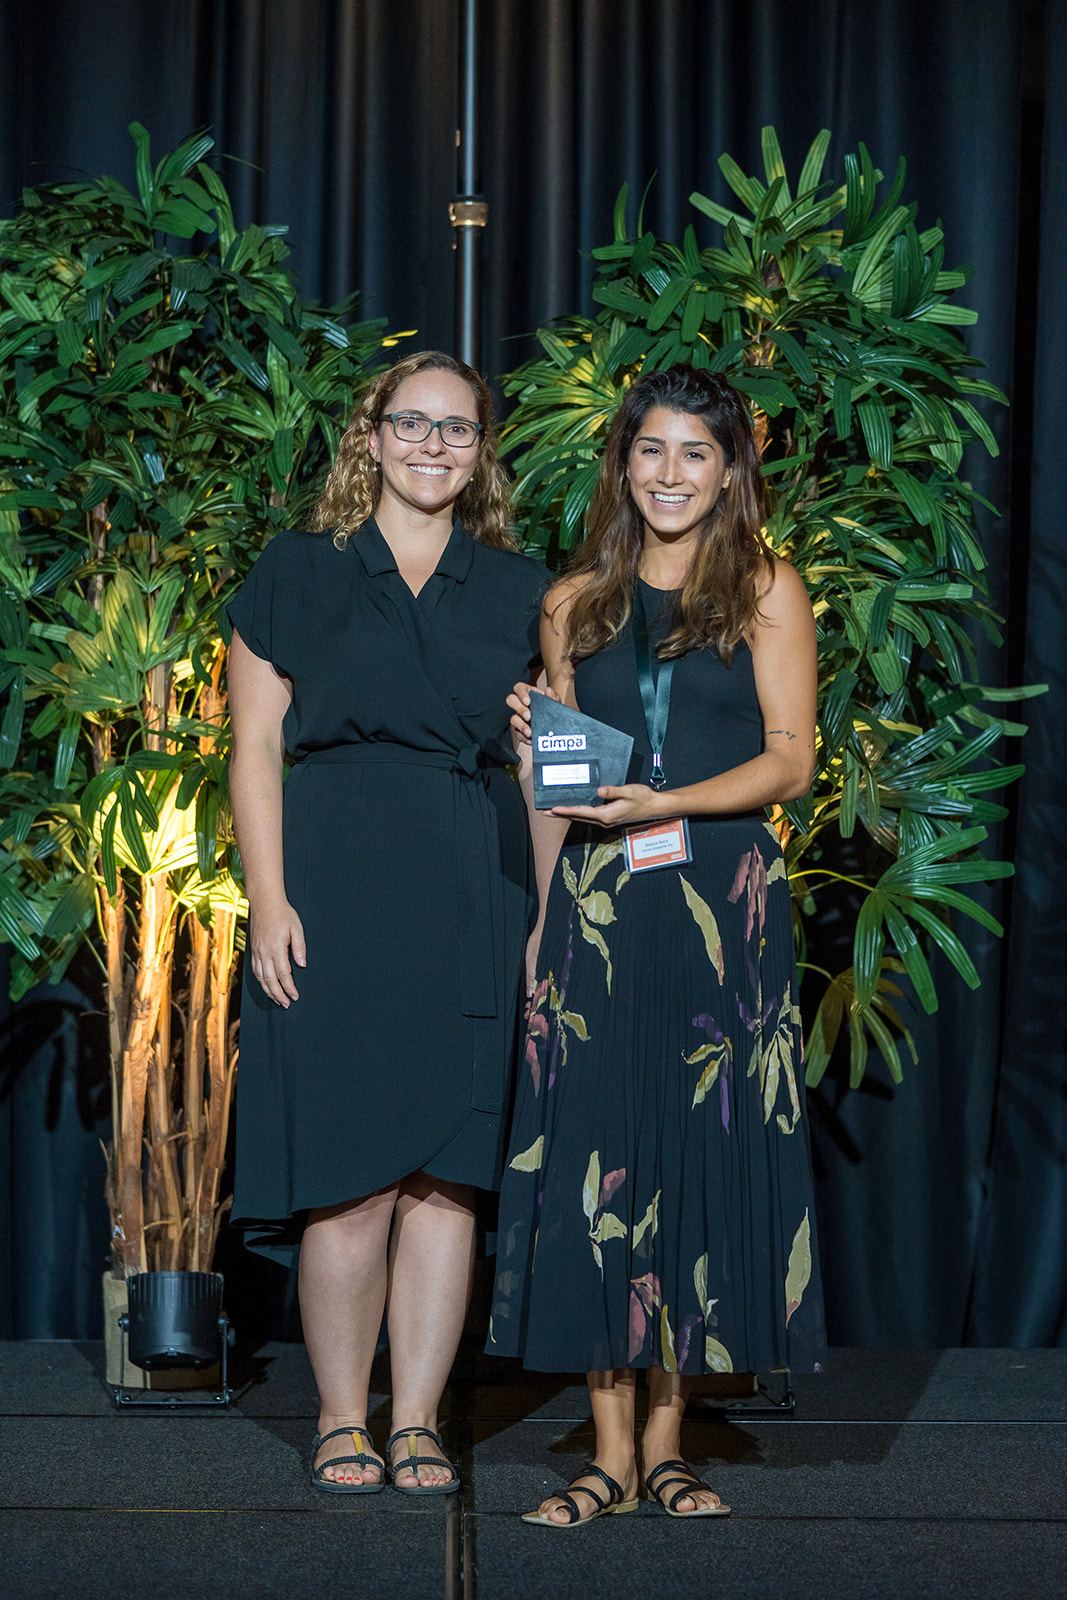 Cayman Enterprise City took home the Community Impact of the Year Award